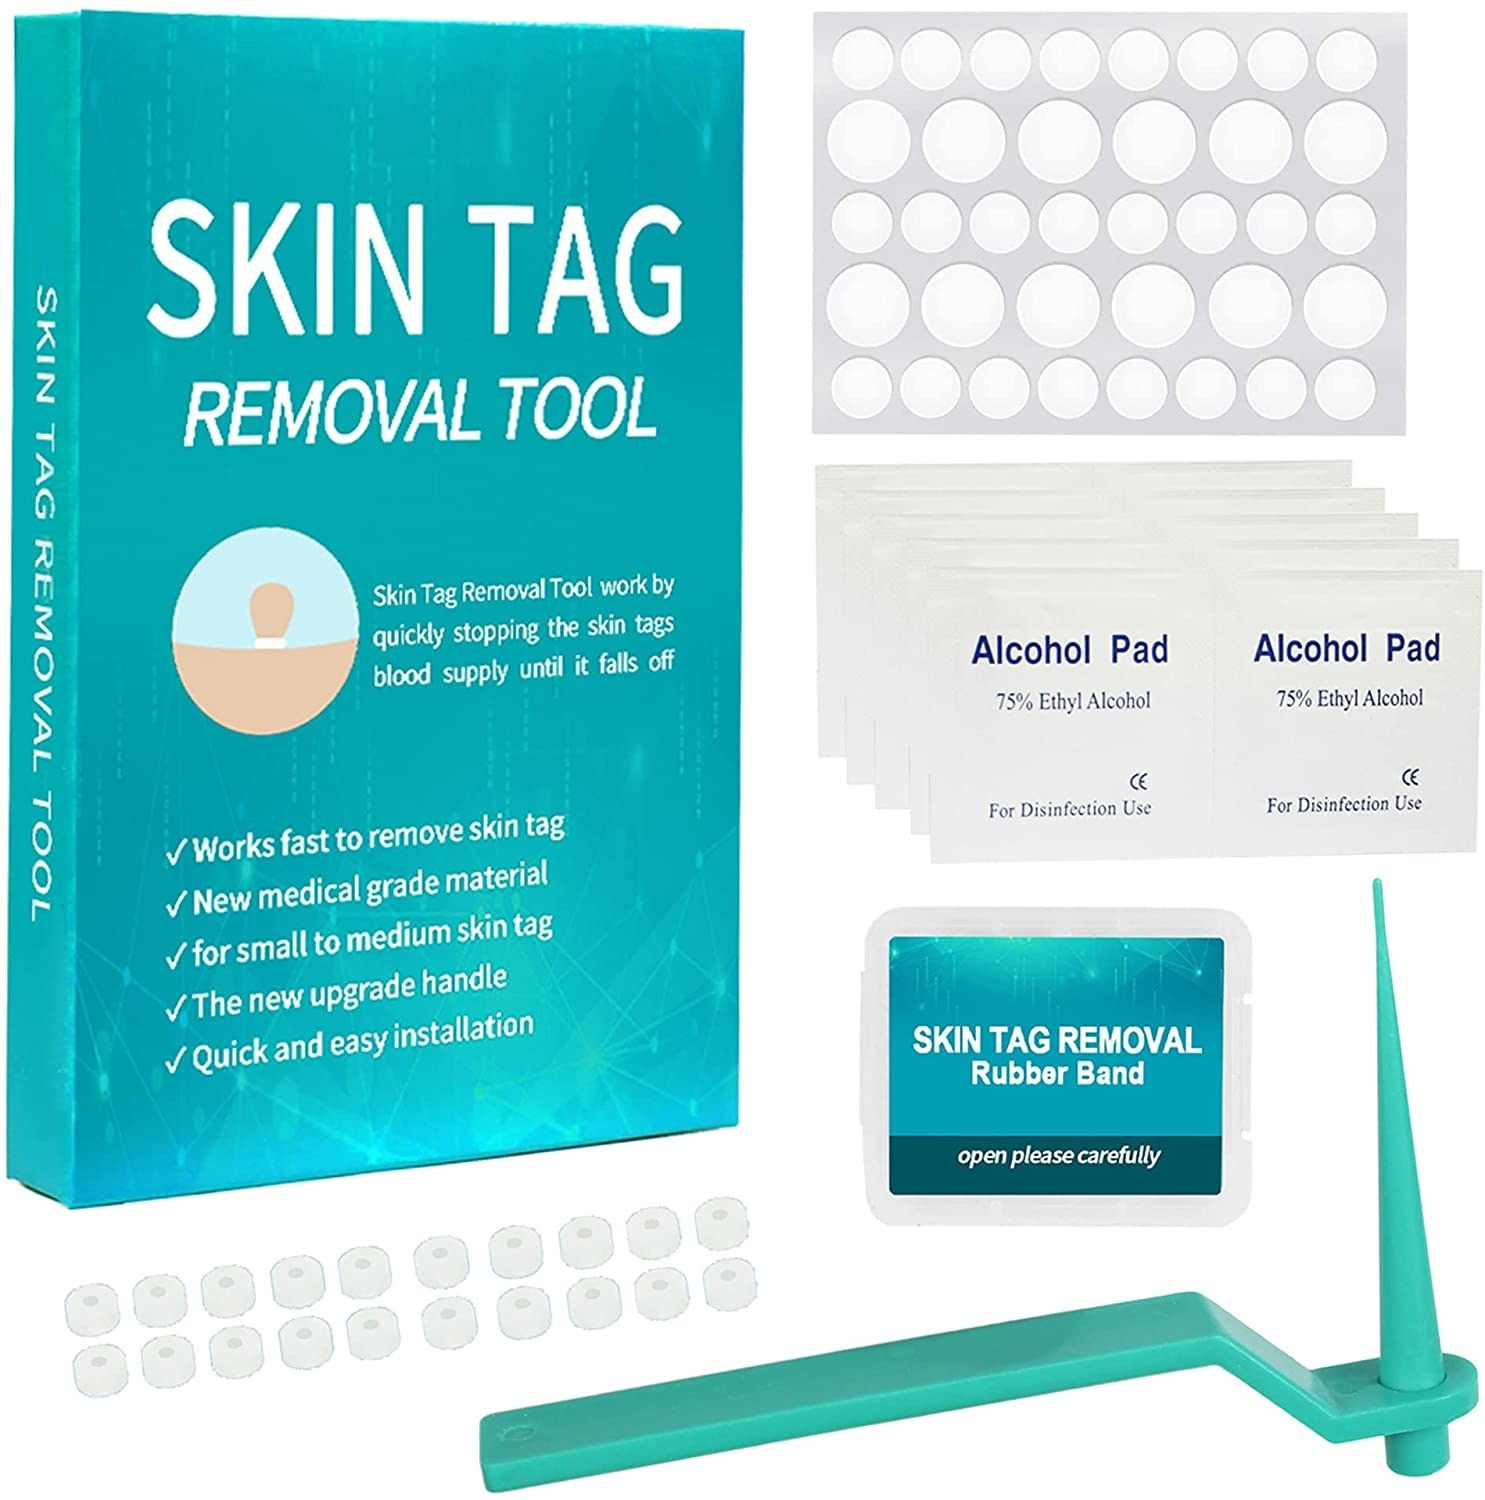 the complete skin tag removing kit that includes a remover tool, cleansing wipes, and removal bands